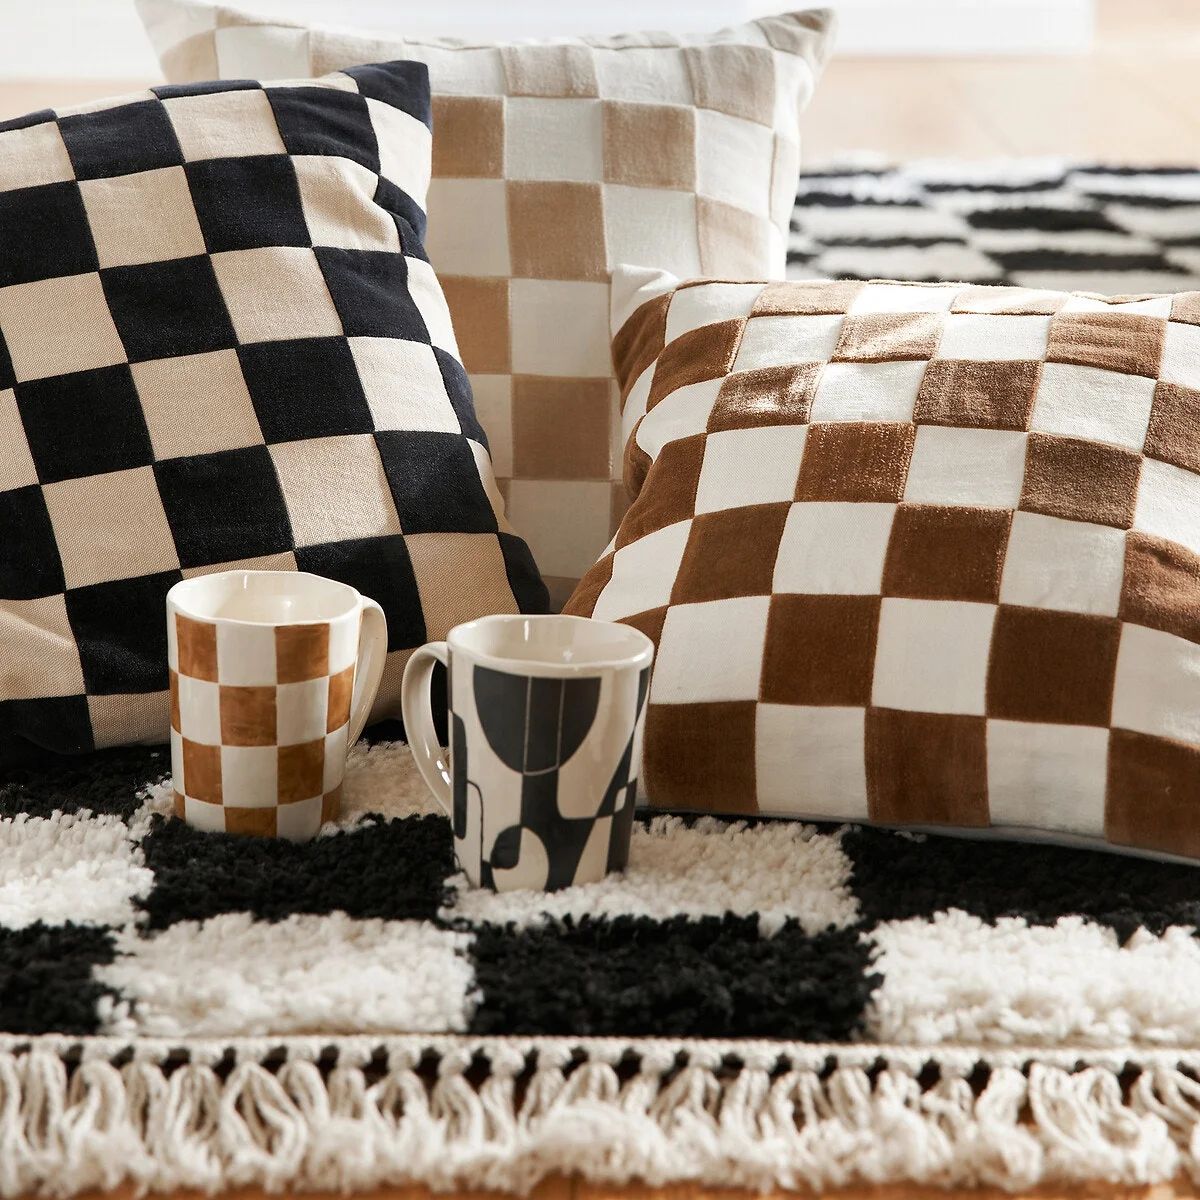 The Checkerboard Pattern Collection